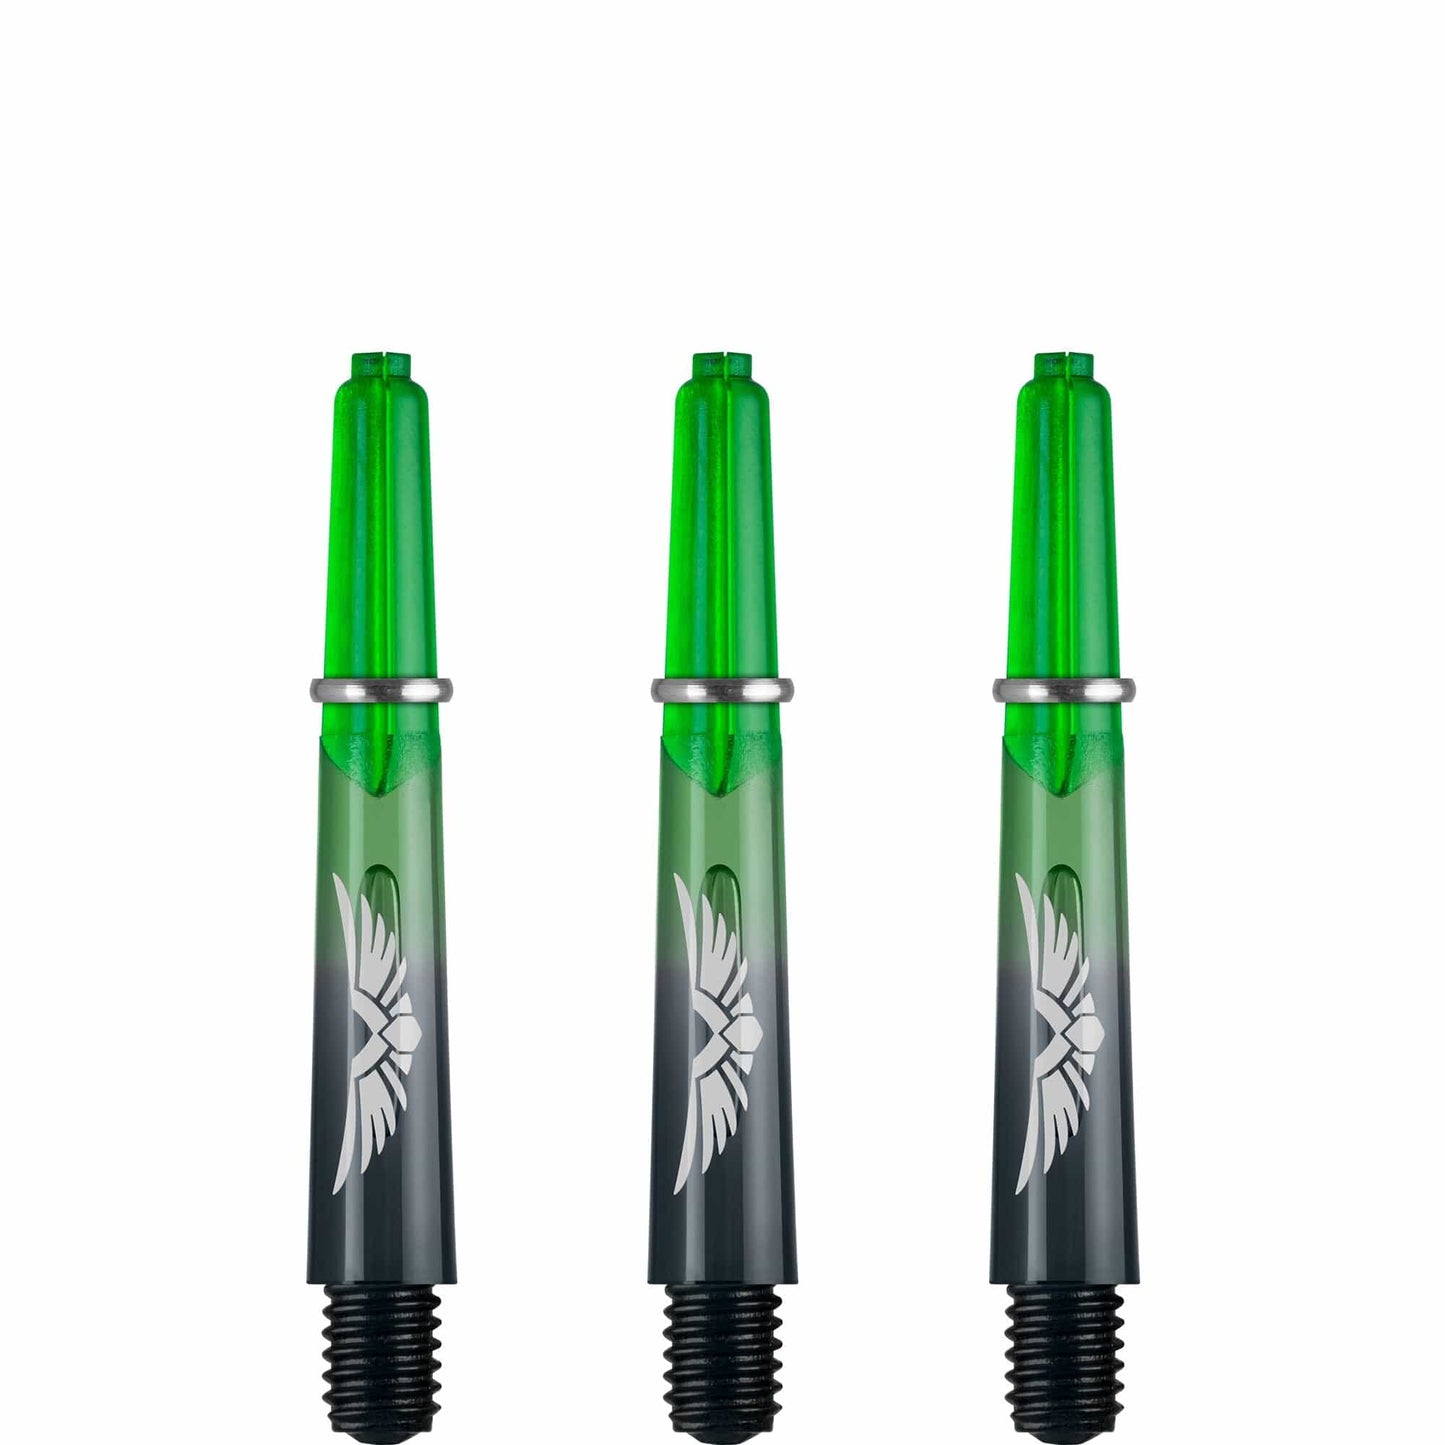 Shot Eagle Claw Dart Shafts - with Machined Rings - Strong Polycarbonate Stems - Black Green Short